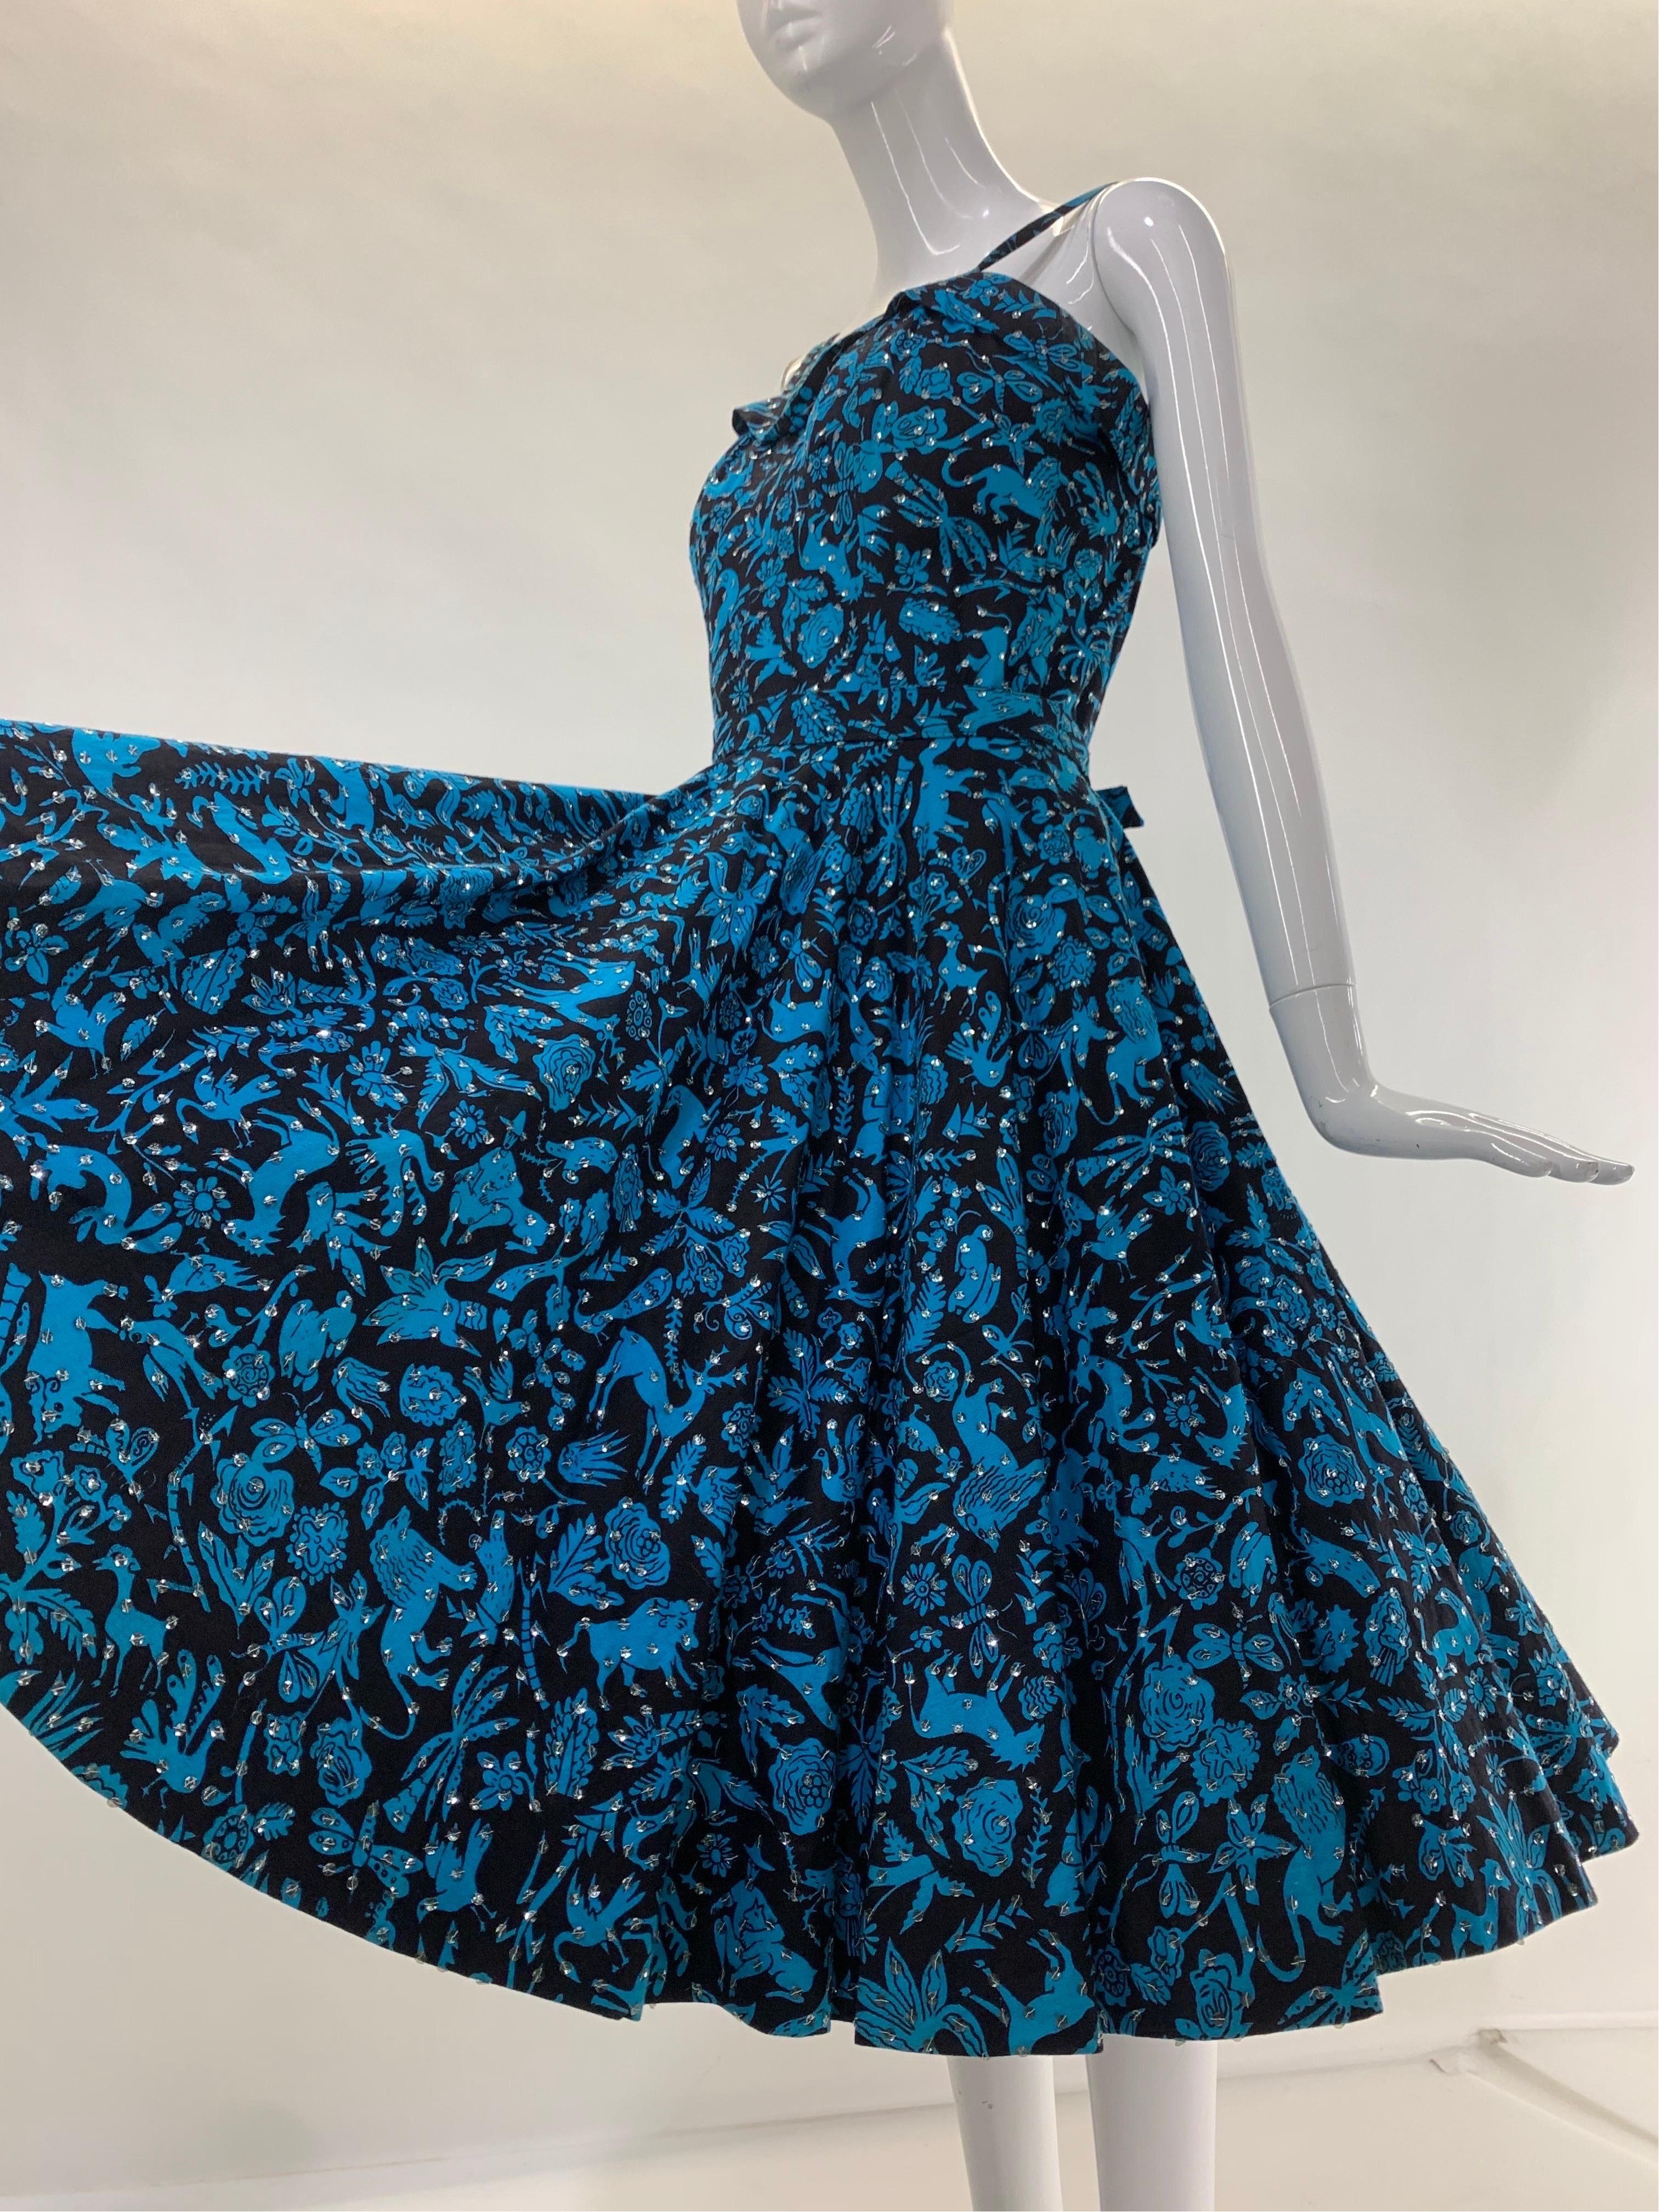 1950s Turquoise & Black Folkloric Print Cotton Summer Dress w/ Scattered Silver Sequins: Fit and flair silhouette and doubled spaghetti straps. Unlined (shown with a crinoline, not included) full circle skirt. Unlabeled vintage made in Mexico. Size